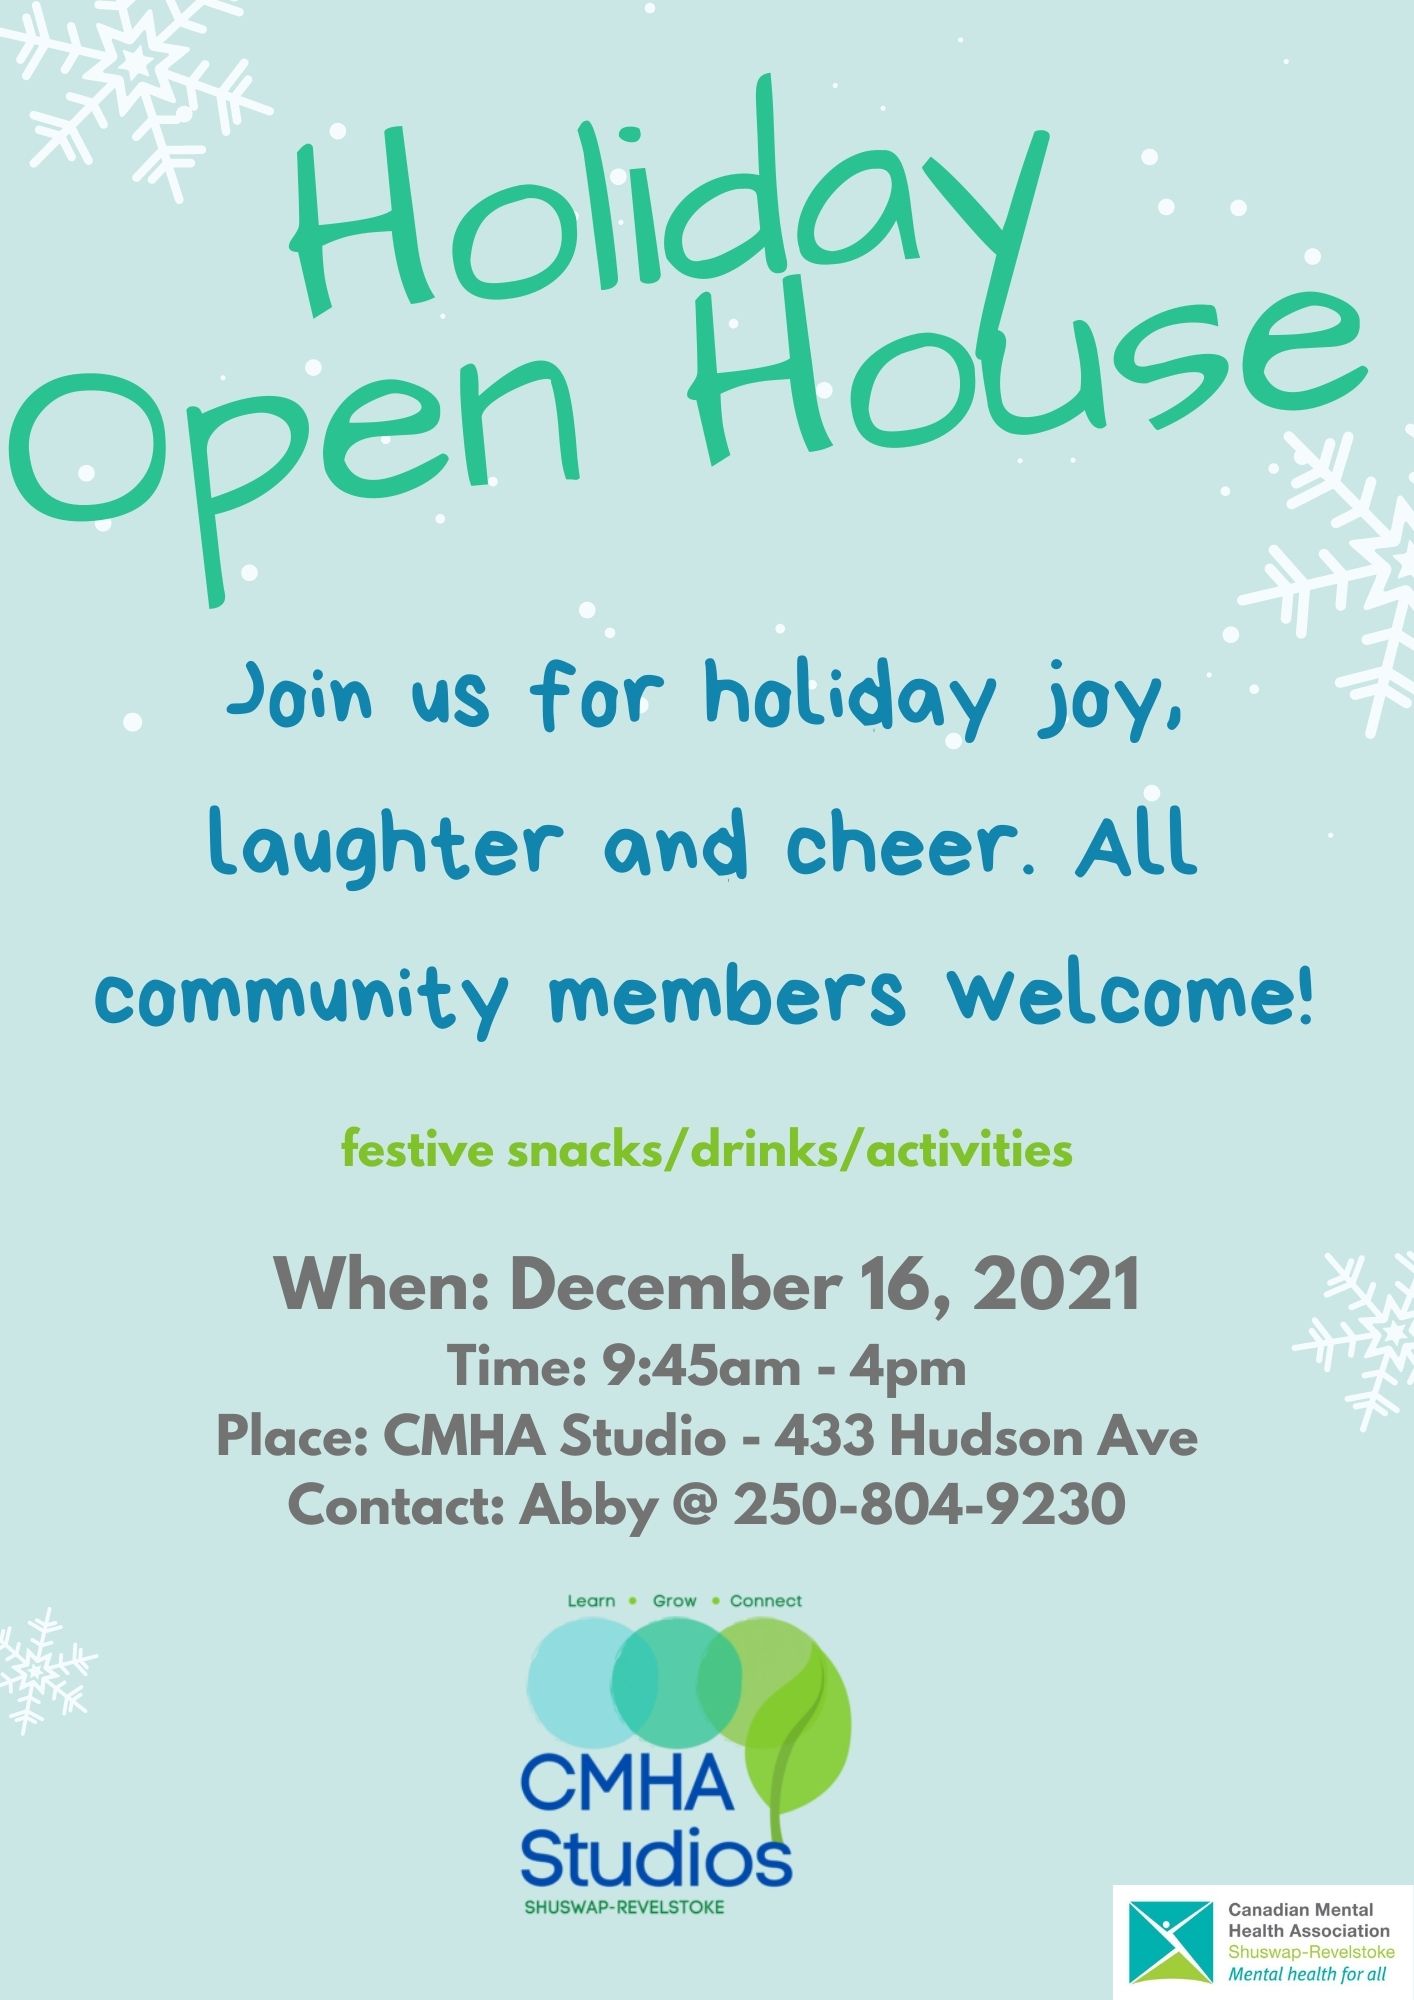 Join us for holiday joy, laughter and cheer. All community members welcome! Dec 16, 2021 9:45 - 4pm